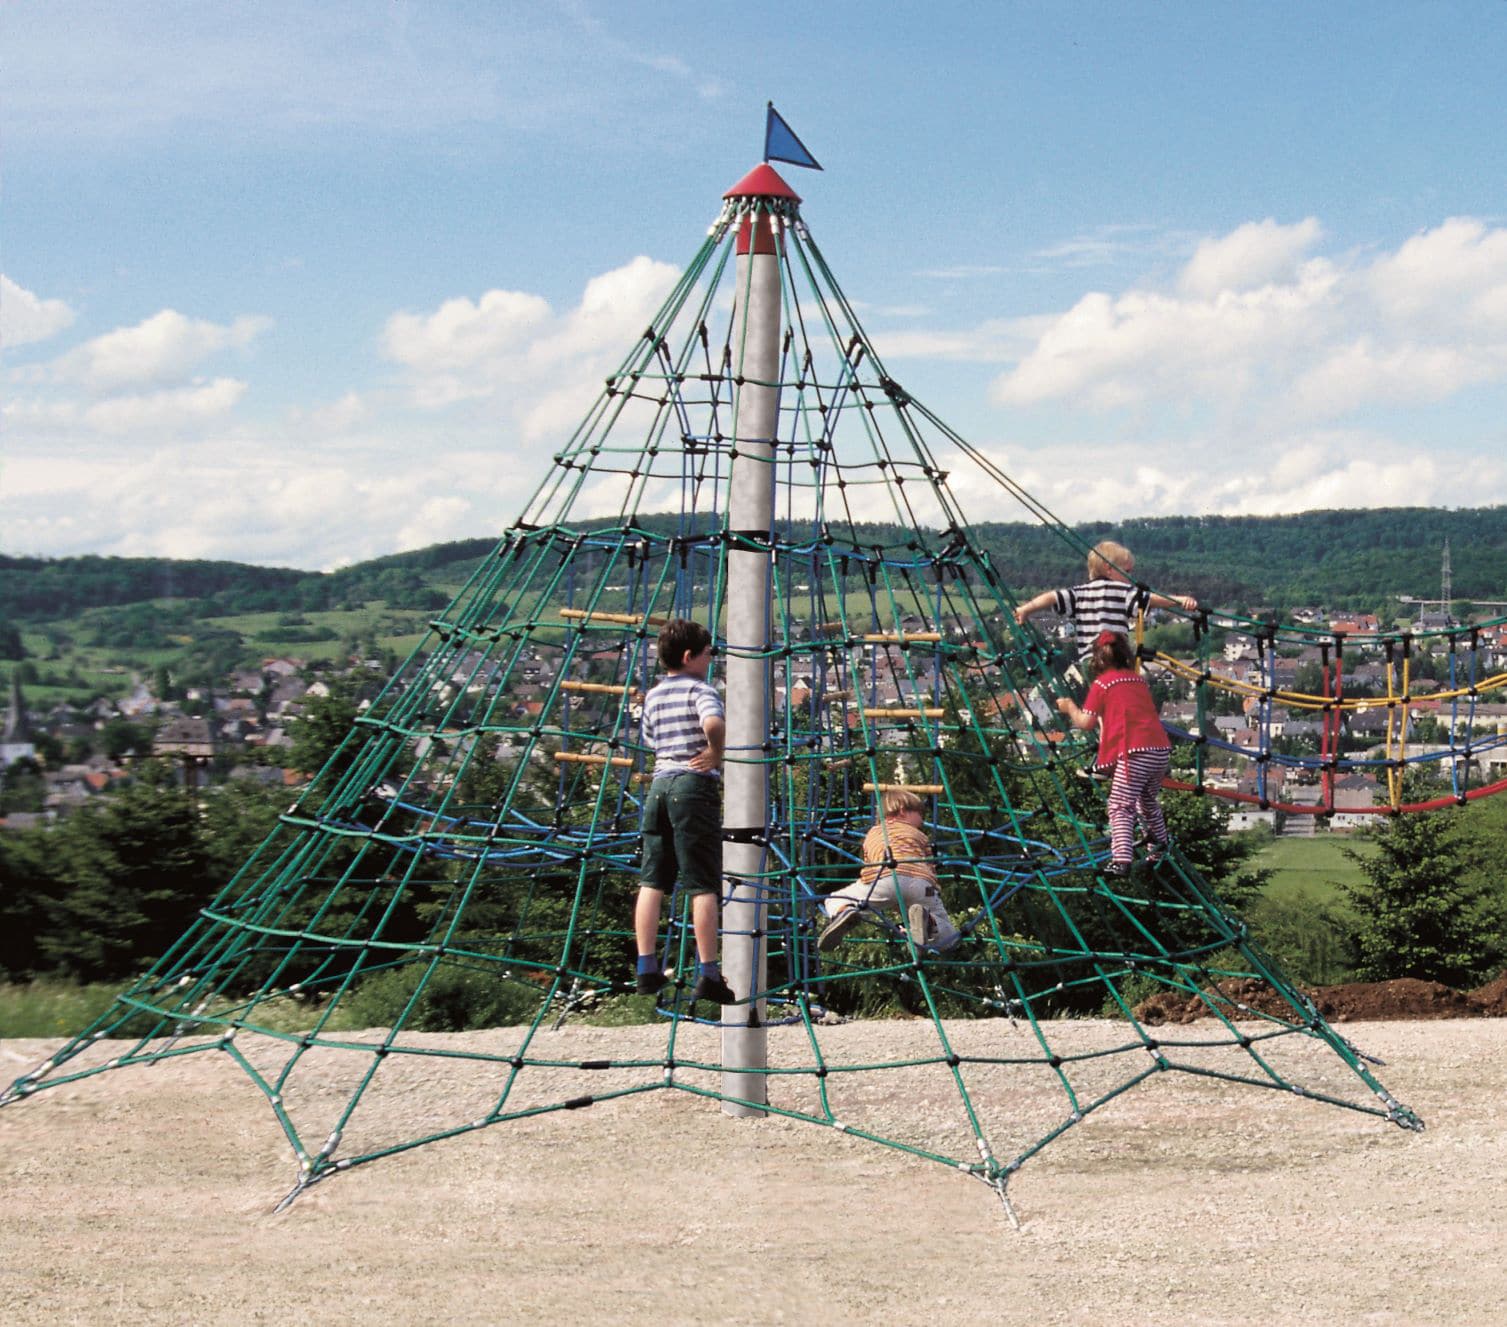 climbing nets for kids, climbing nets for kids Suppliers and